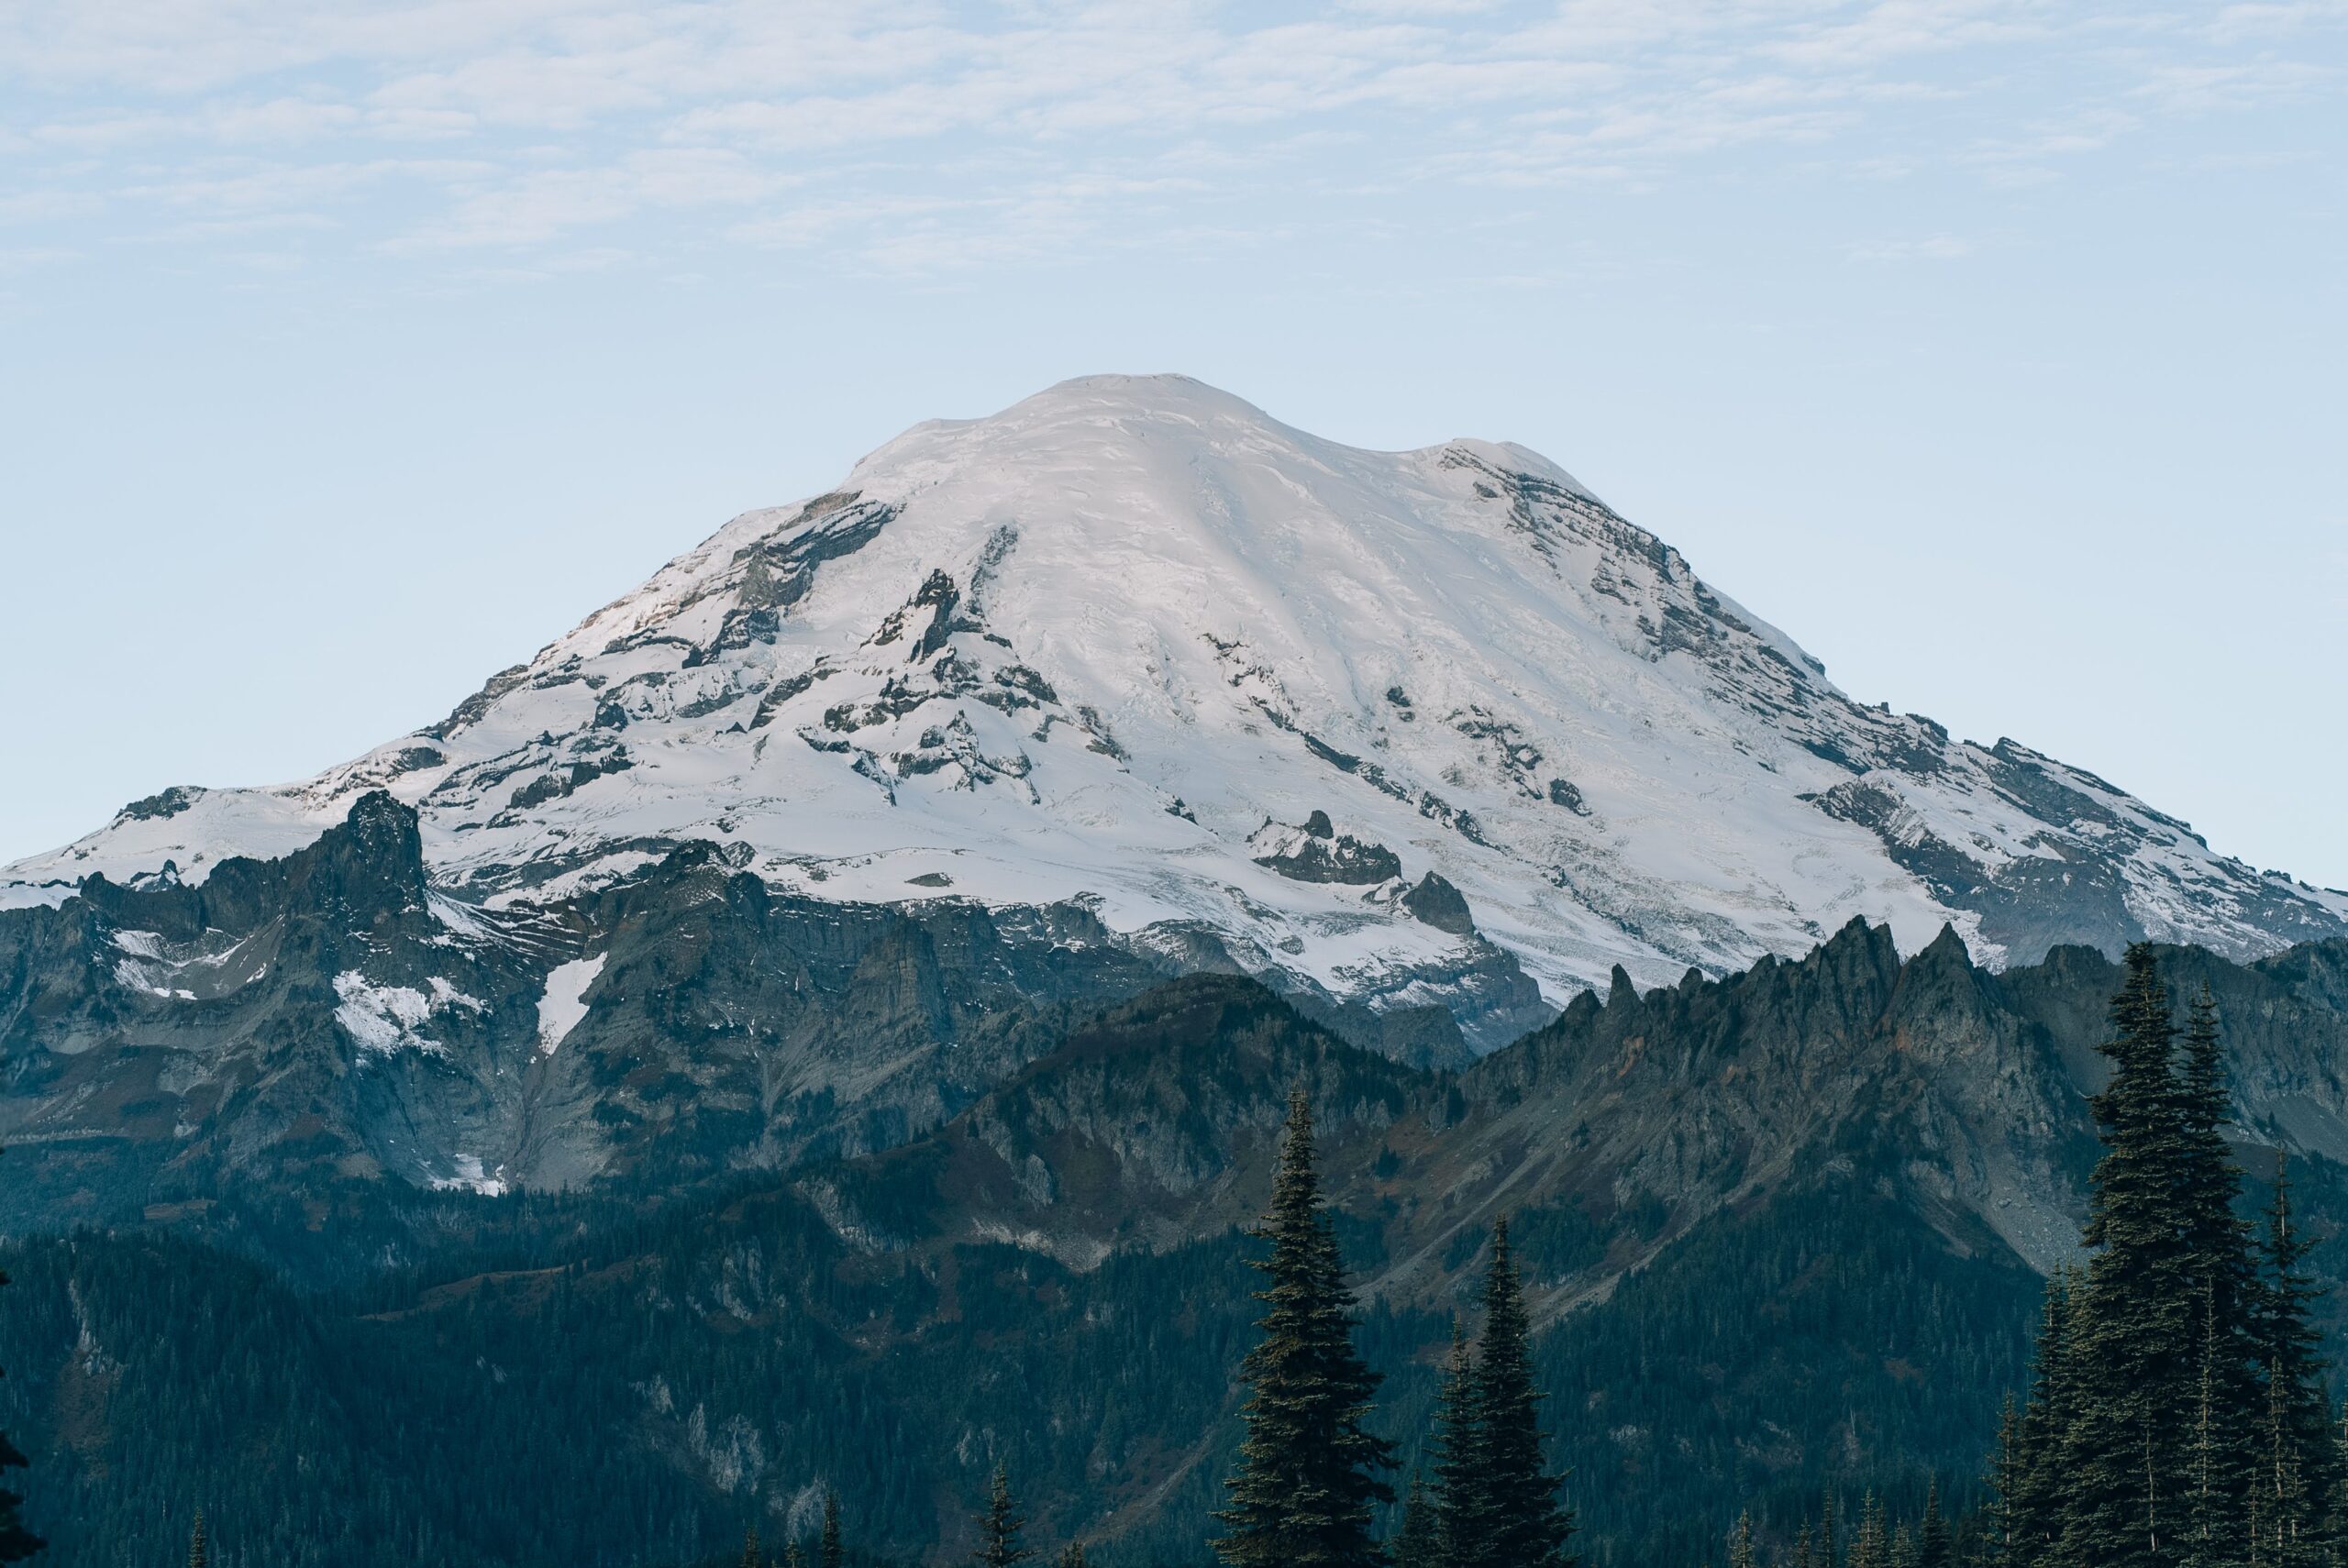 The Beauty and Challenge of Climbing Mt. Rainier